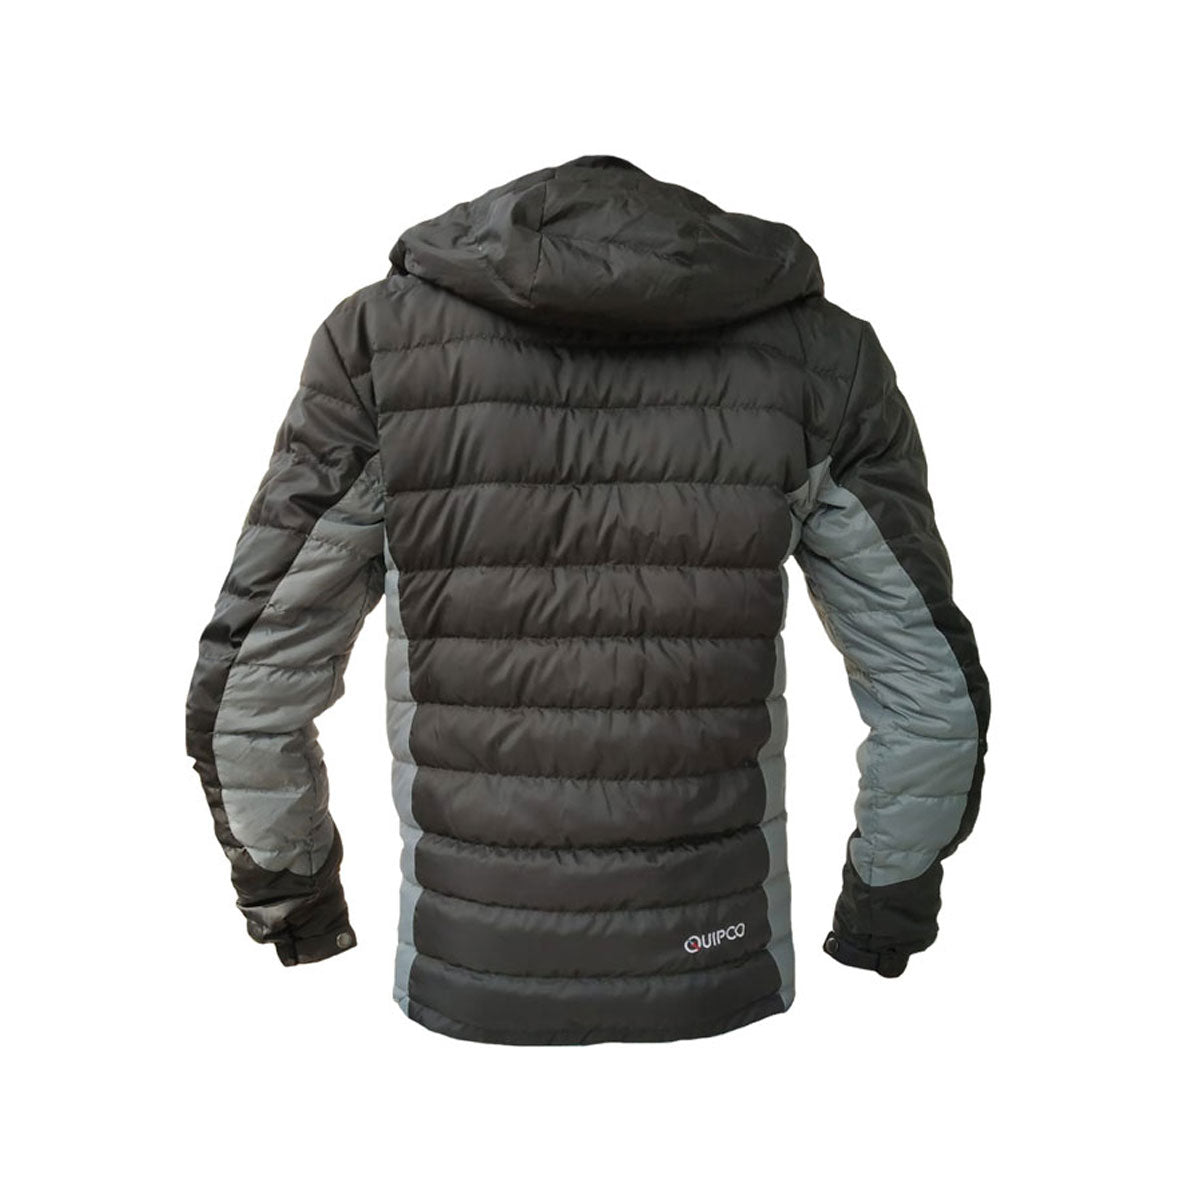 EverTherm Down Jacket - Hooded 4